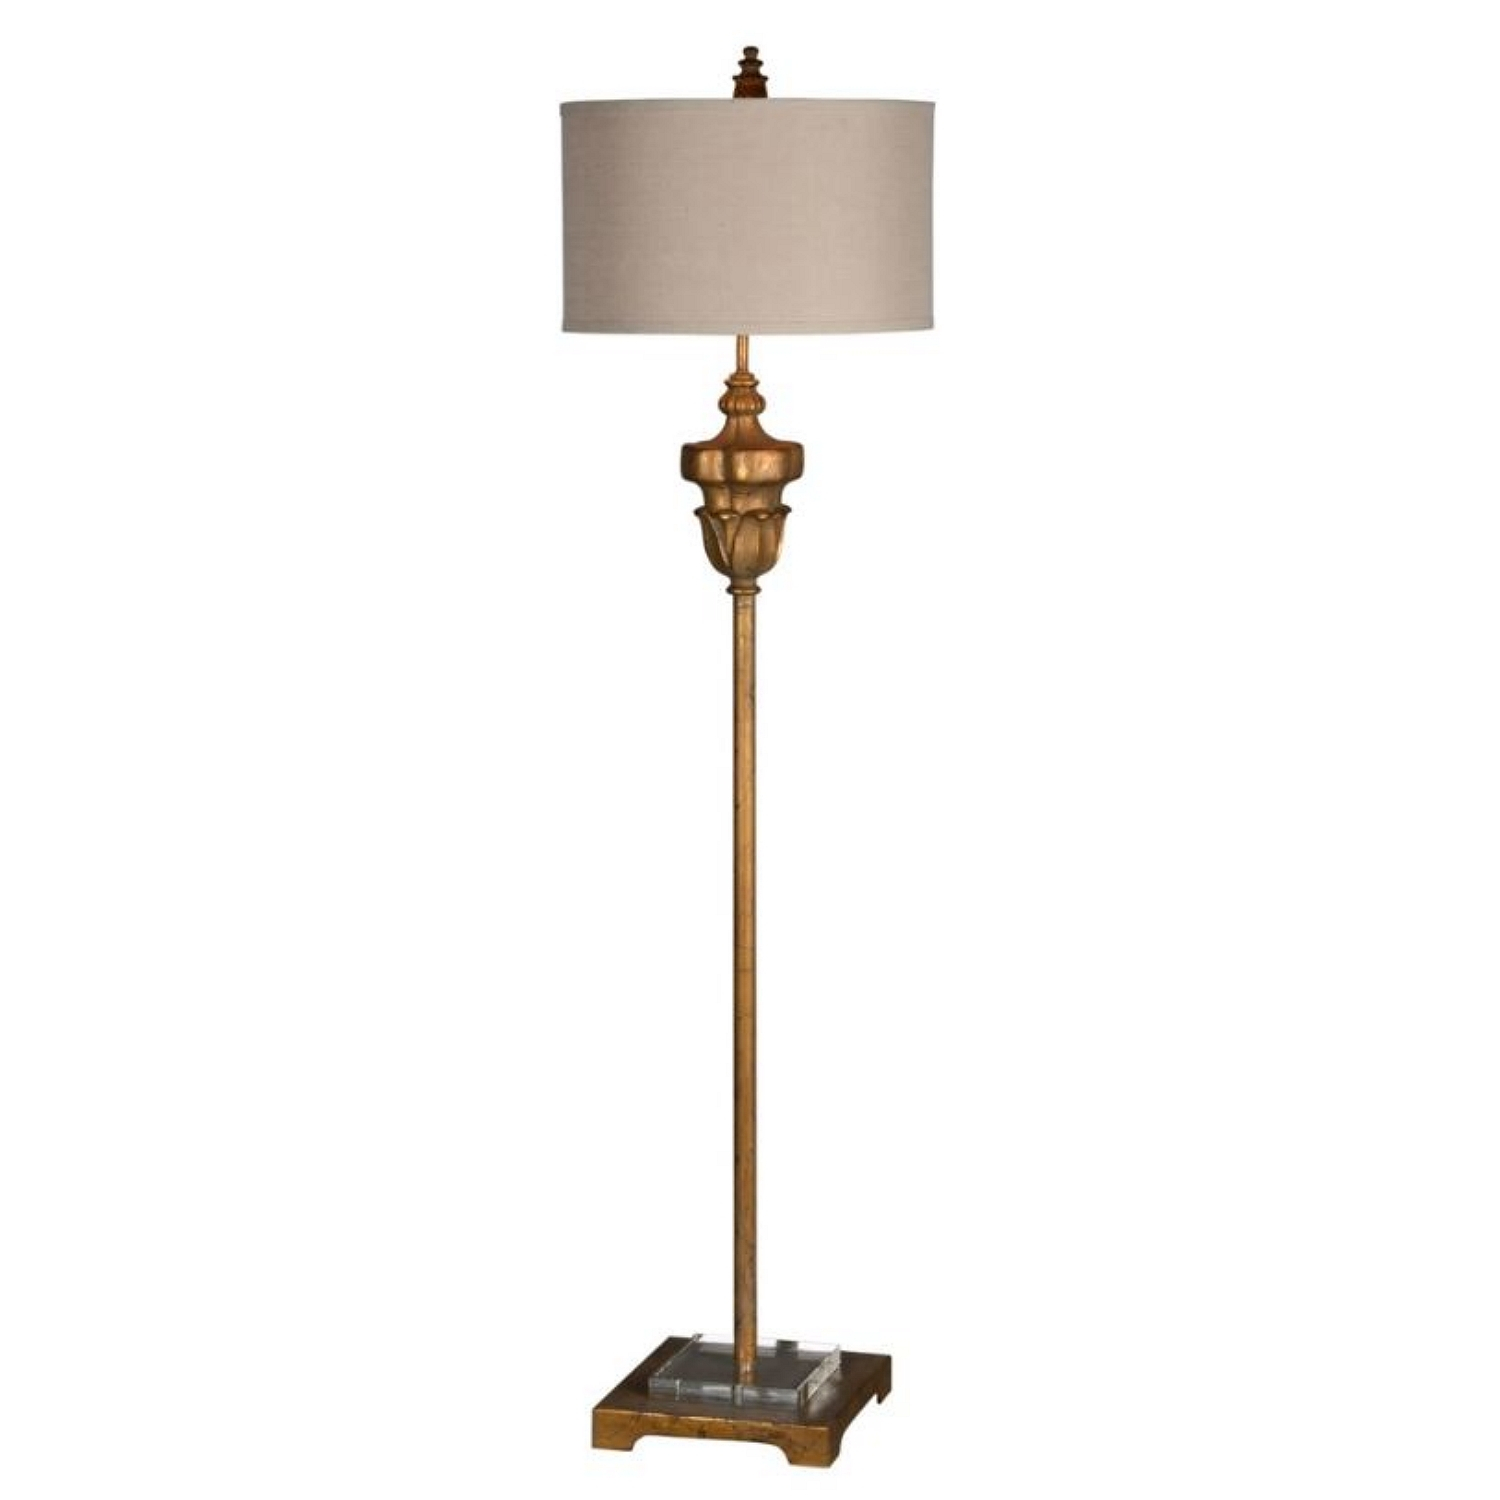 Details About Gold Leaf Floor Lamp With Lucite And Tulip Shape Design Beige Shade Included in sizing 1500 X 1500